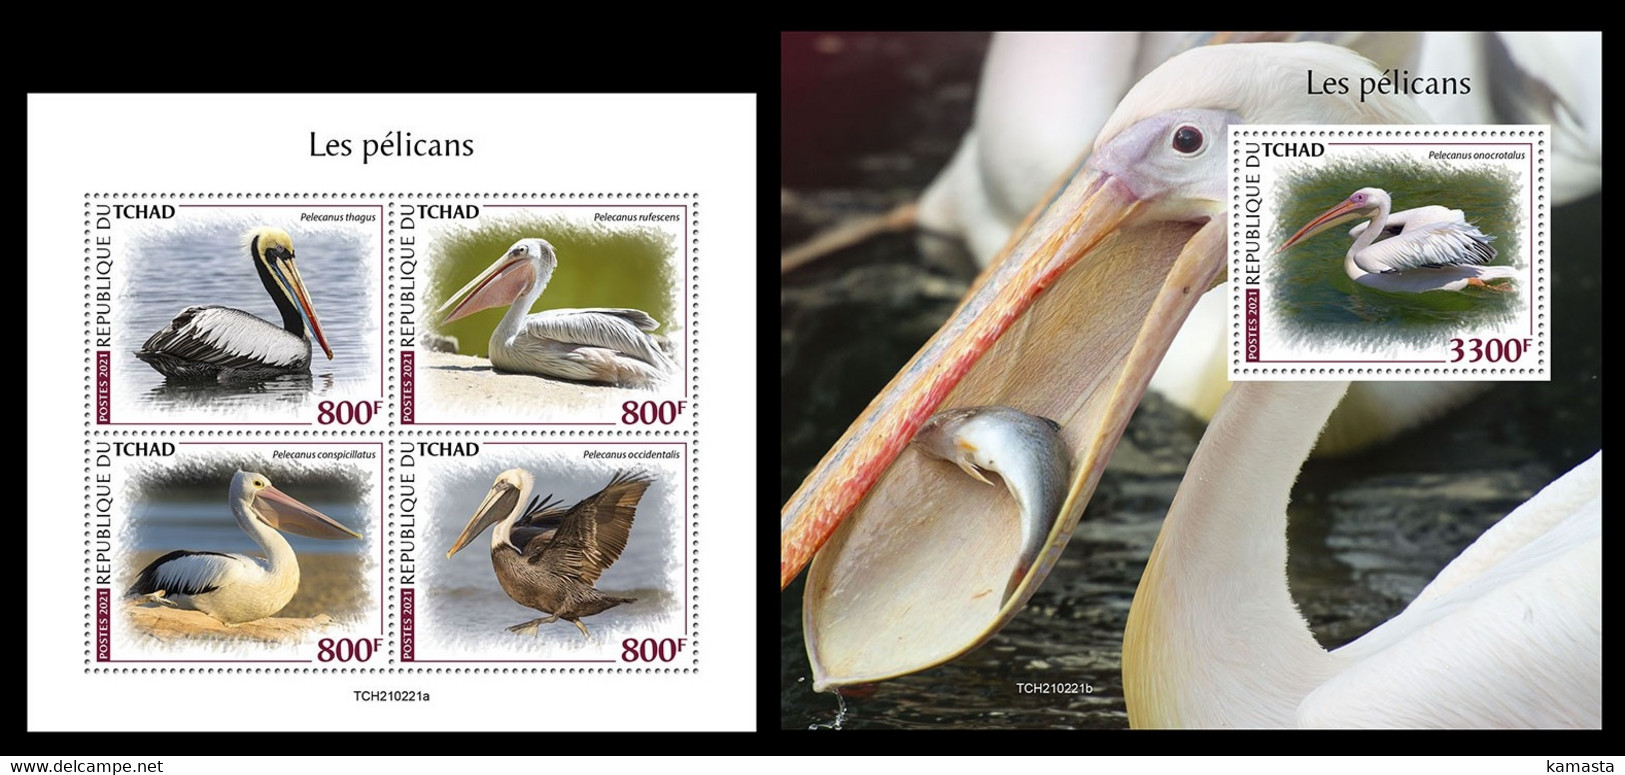 Chad 2021 Pelicans. (221) OFFICIAL ISSUE - Pélicans